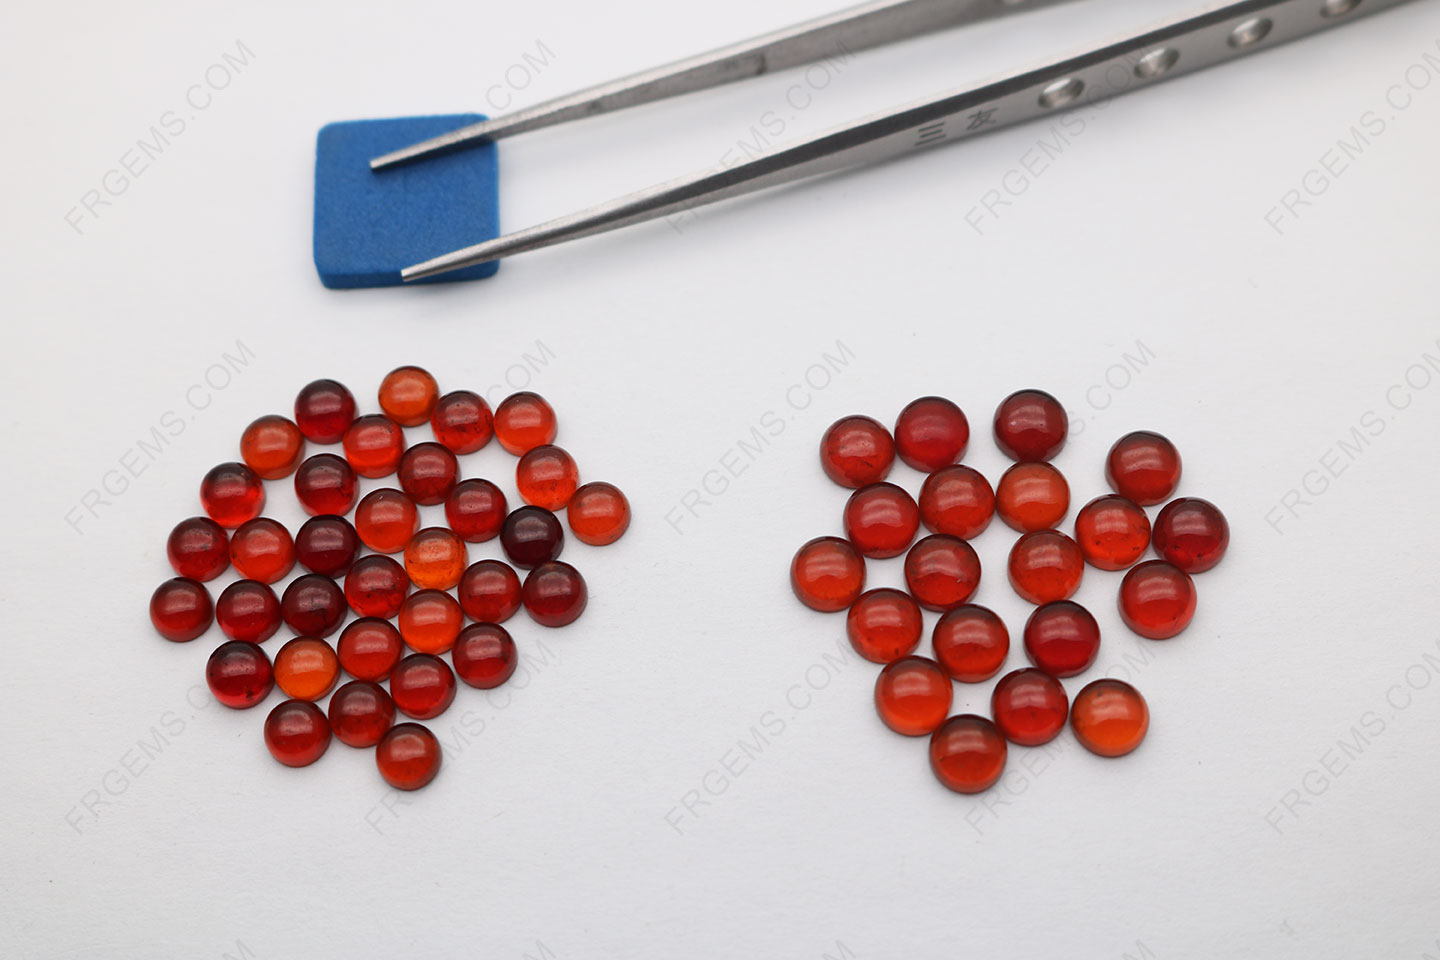 Loose Natural Garnet Red color Round Cabochon 5mm and 6mm Gemstones wholesale from china